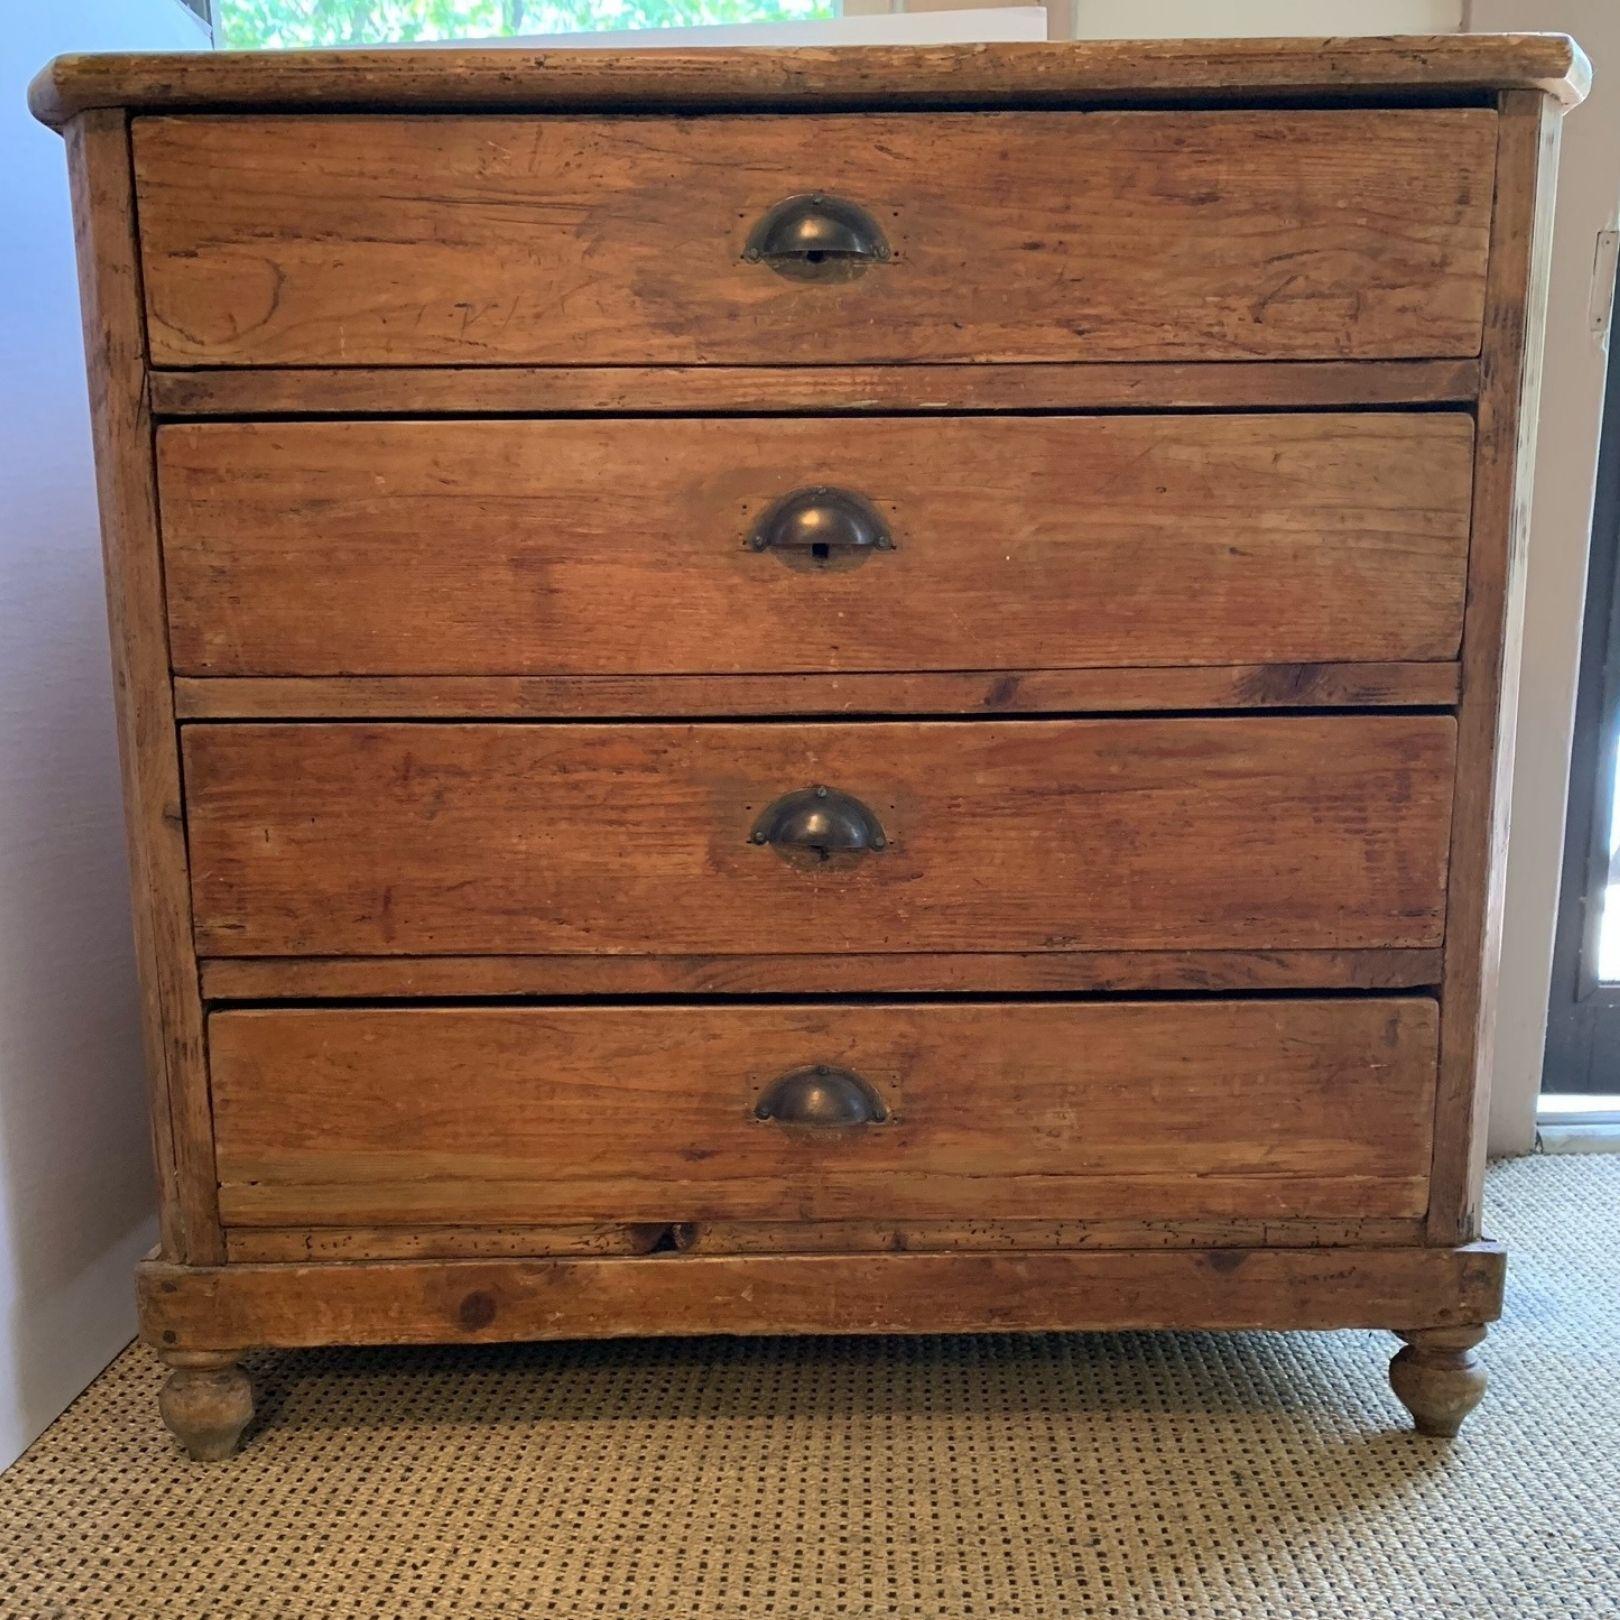 Vintage oak dresser, distressed surface, normal wear and tear consistent with age and use. Four drawers, brass hardware.